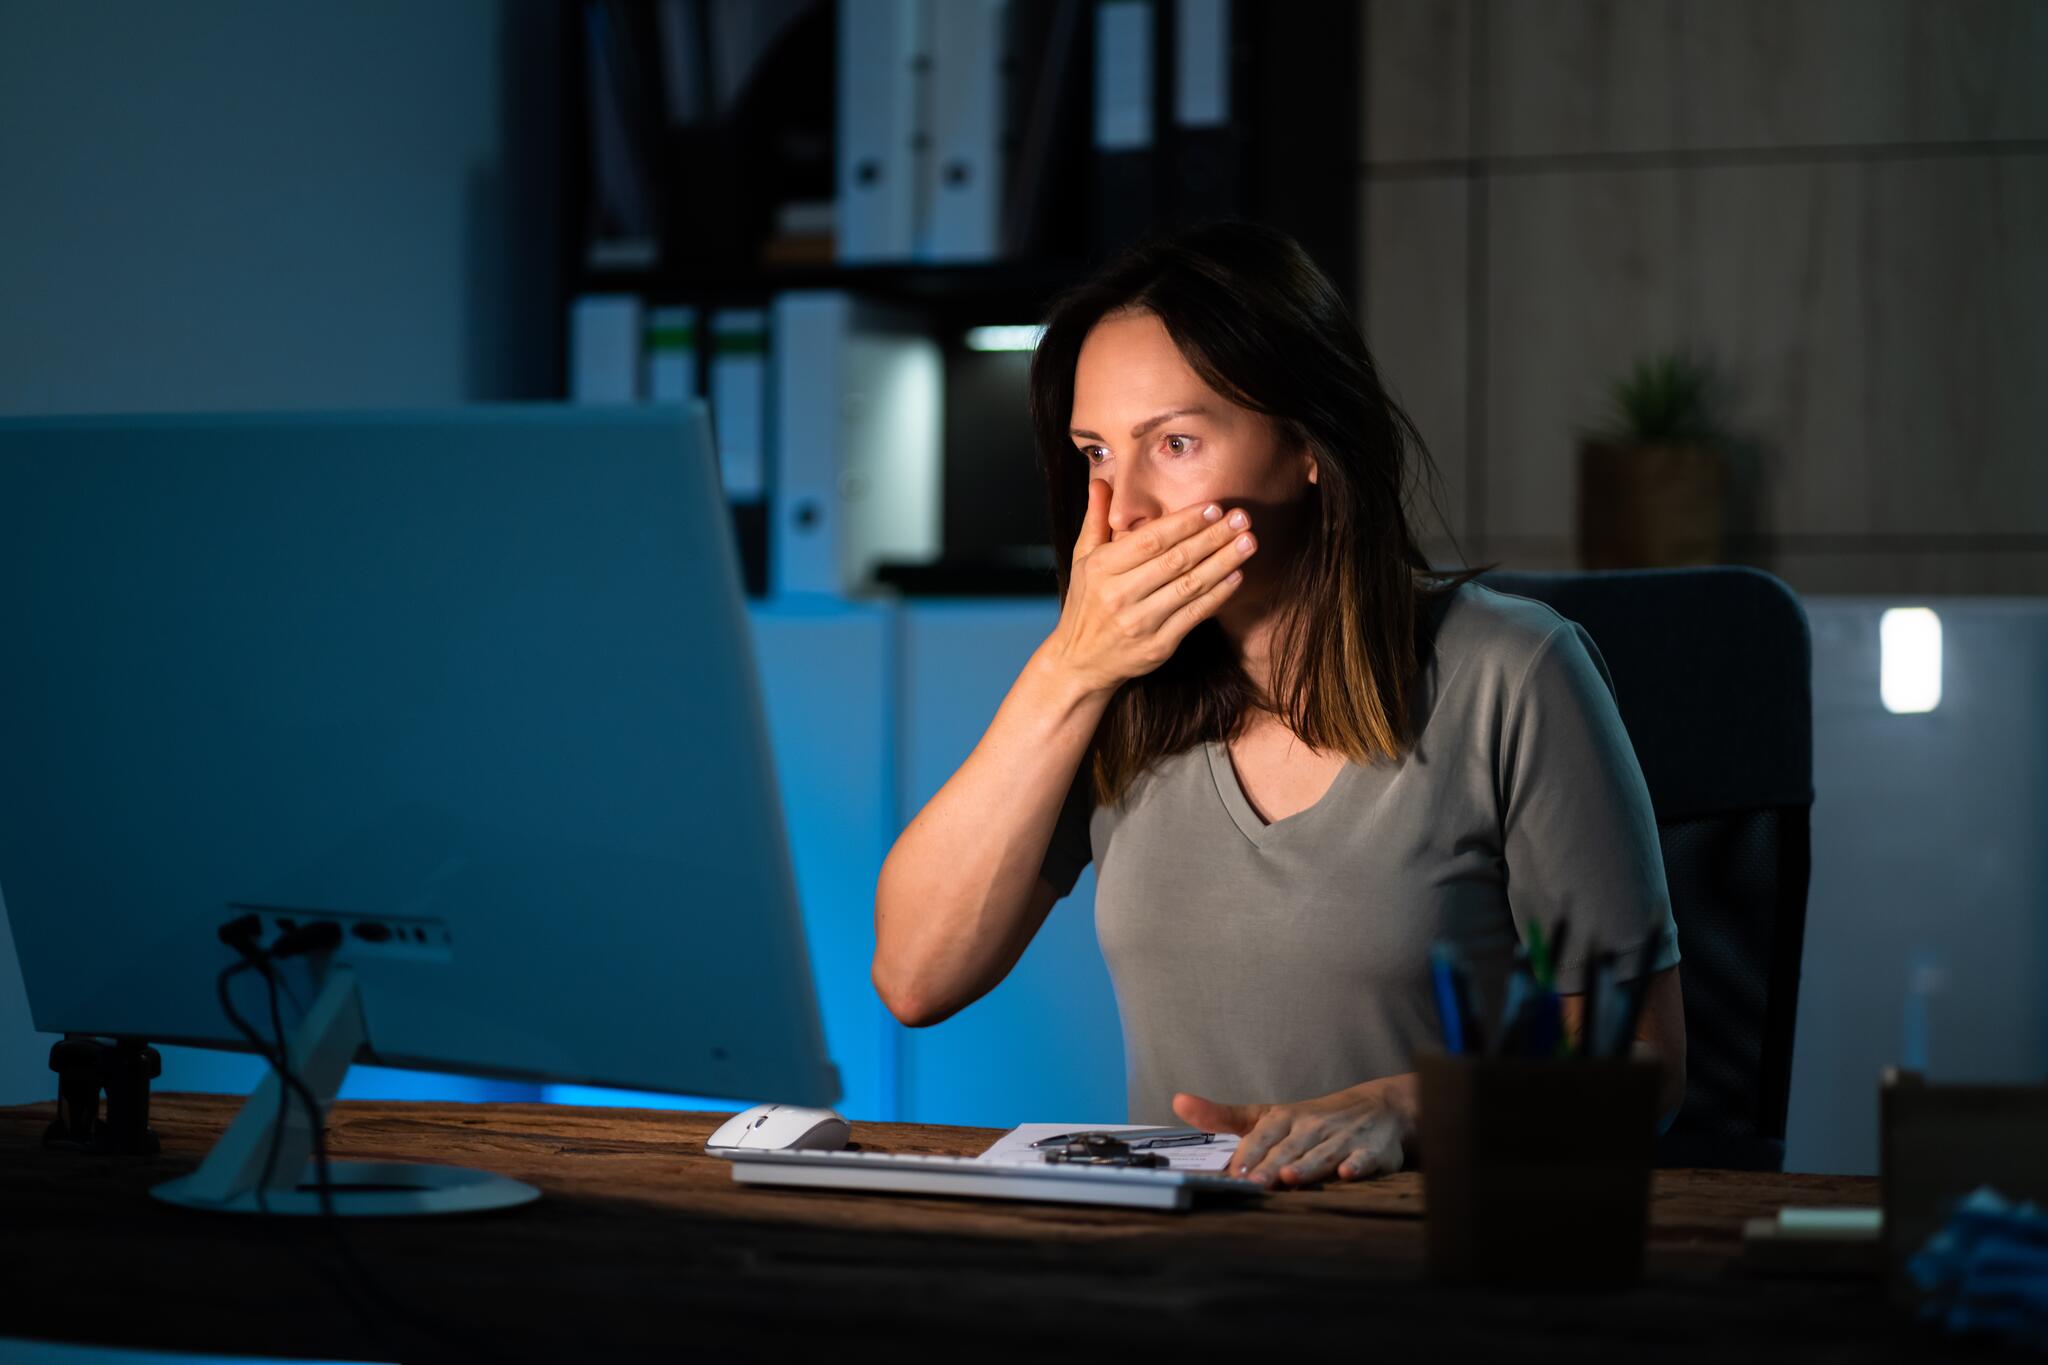 A woman sits in front of a computer with a shocked expression on her face. Her hand covers her mouth.